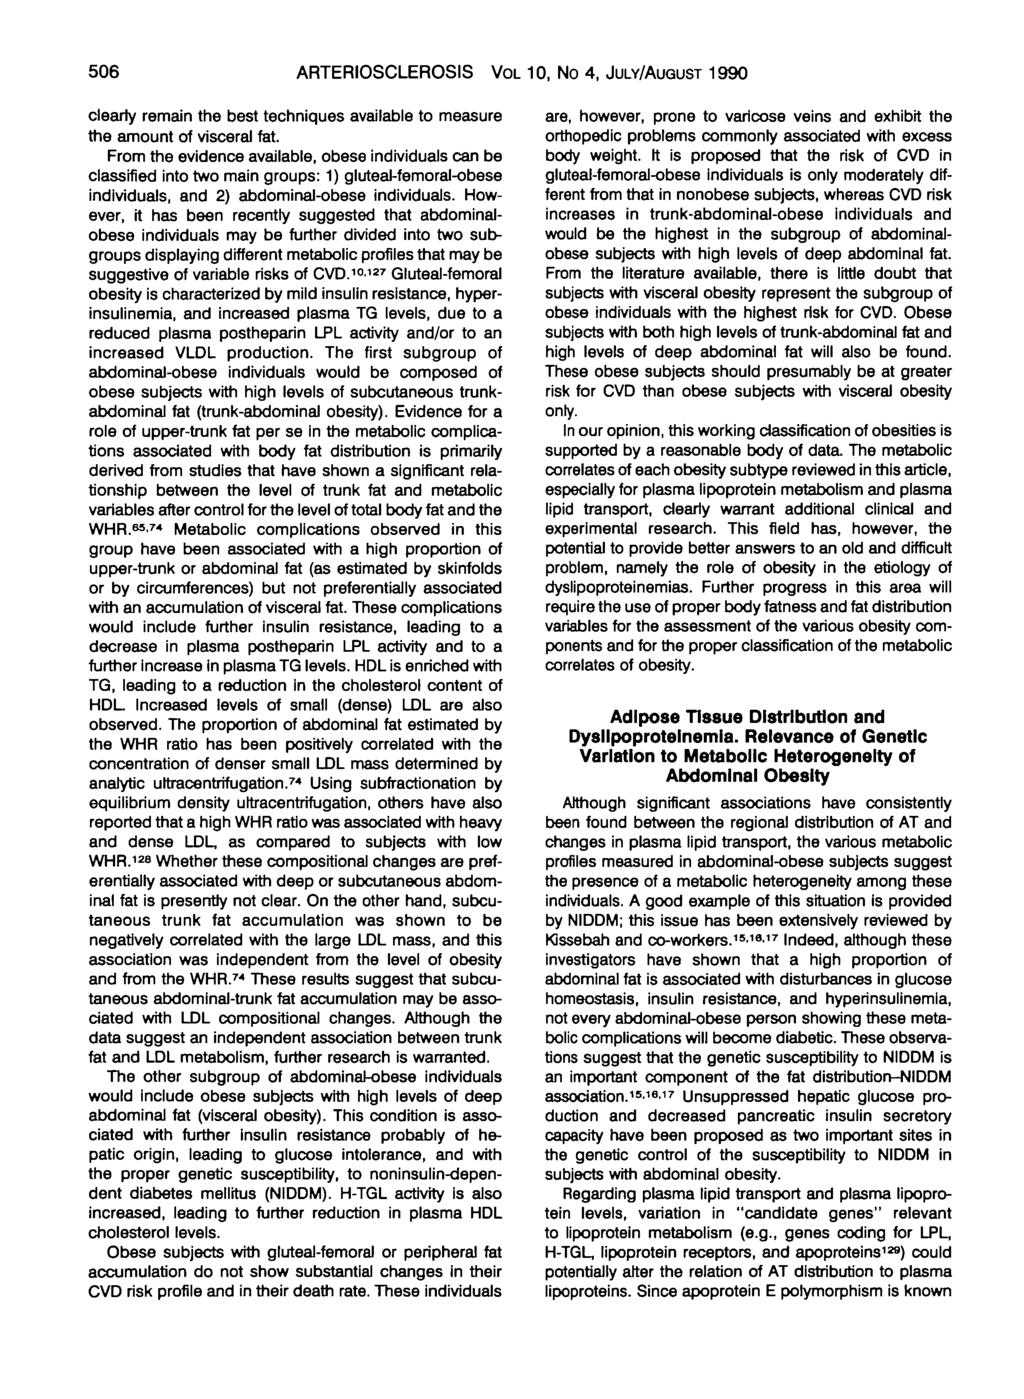 506 ARTERIOSCLEROSIS VOL 10, No 4, JULY/AUGUST 1990 clearly remain the best techniques available to measure the amount of visceral fat.